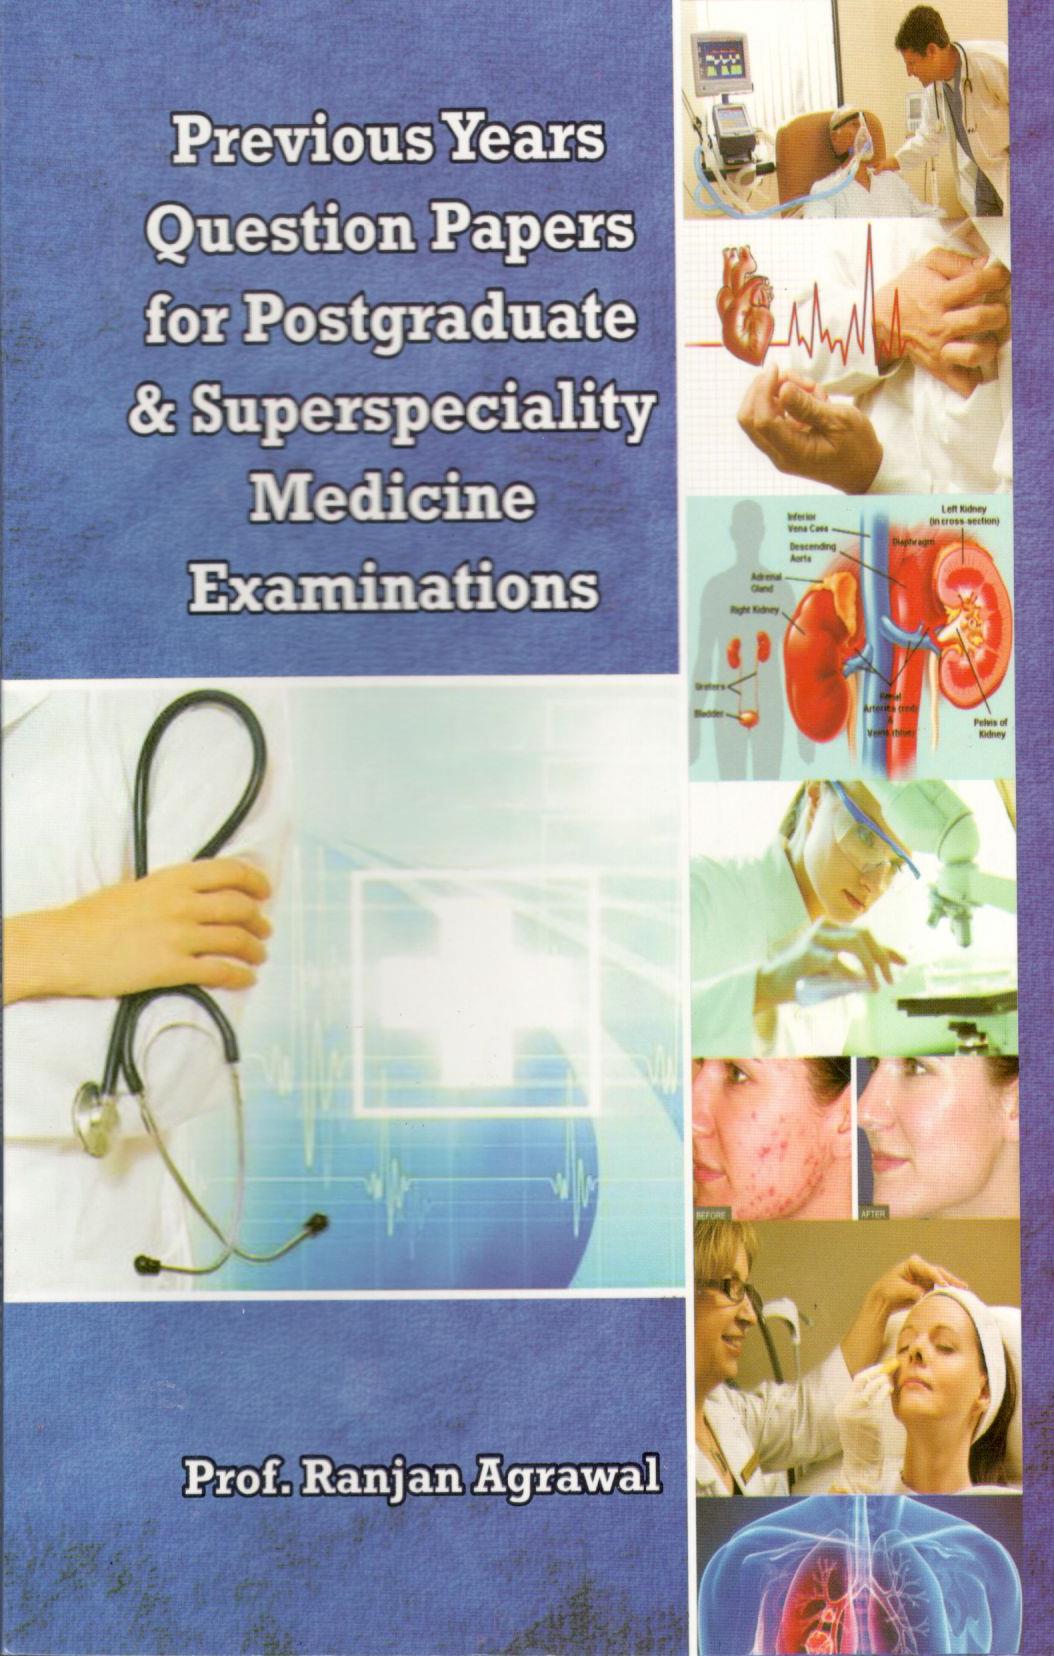 Previous Years Question Papers For Postgraduate & Superspeciality Medicine Examinations